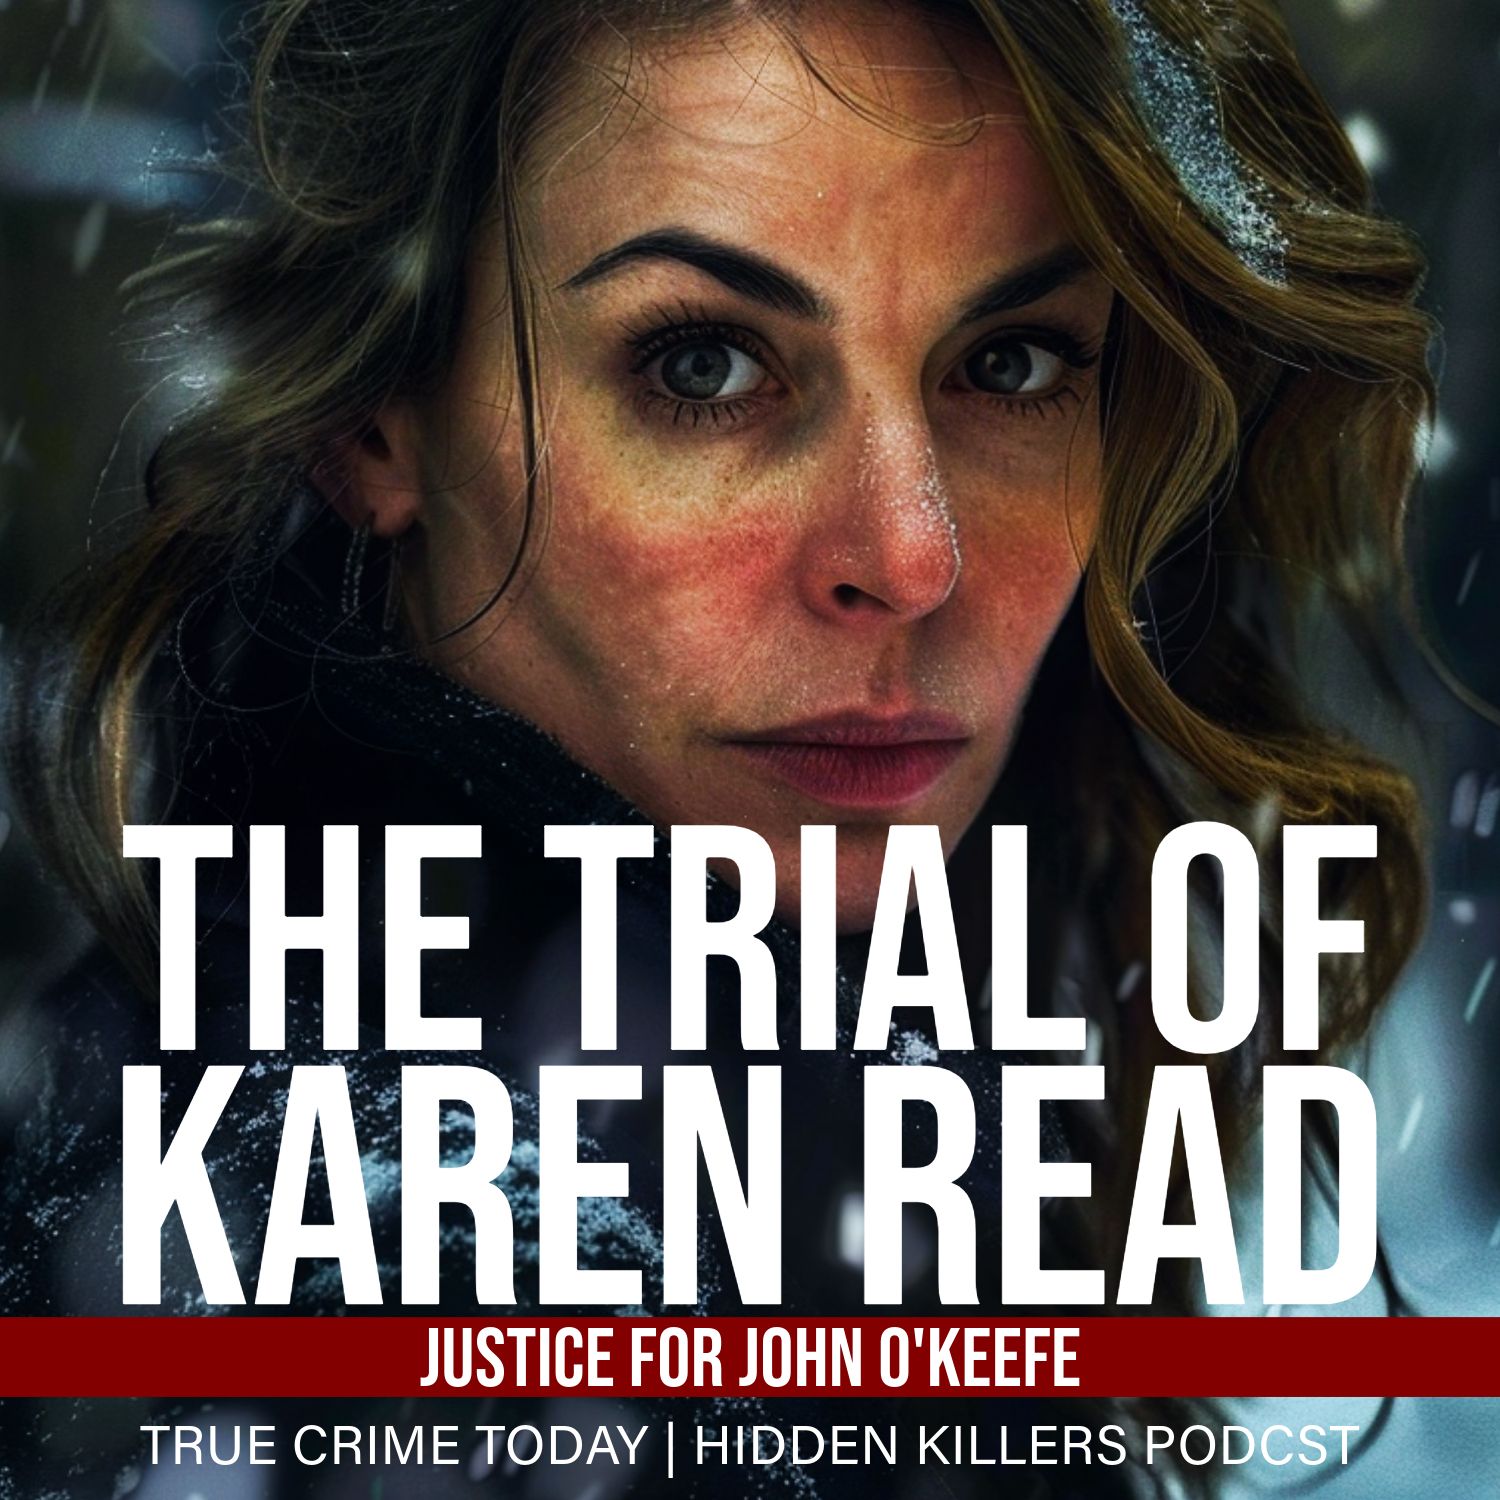 How Accurate Is The Cell Phone Data In The Karen Read Trial?